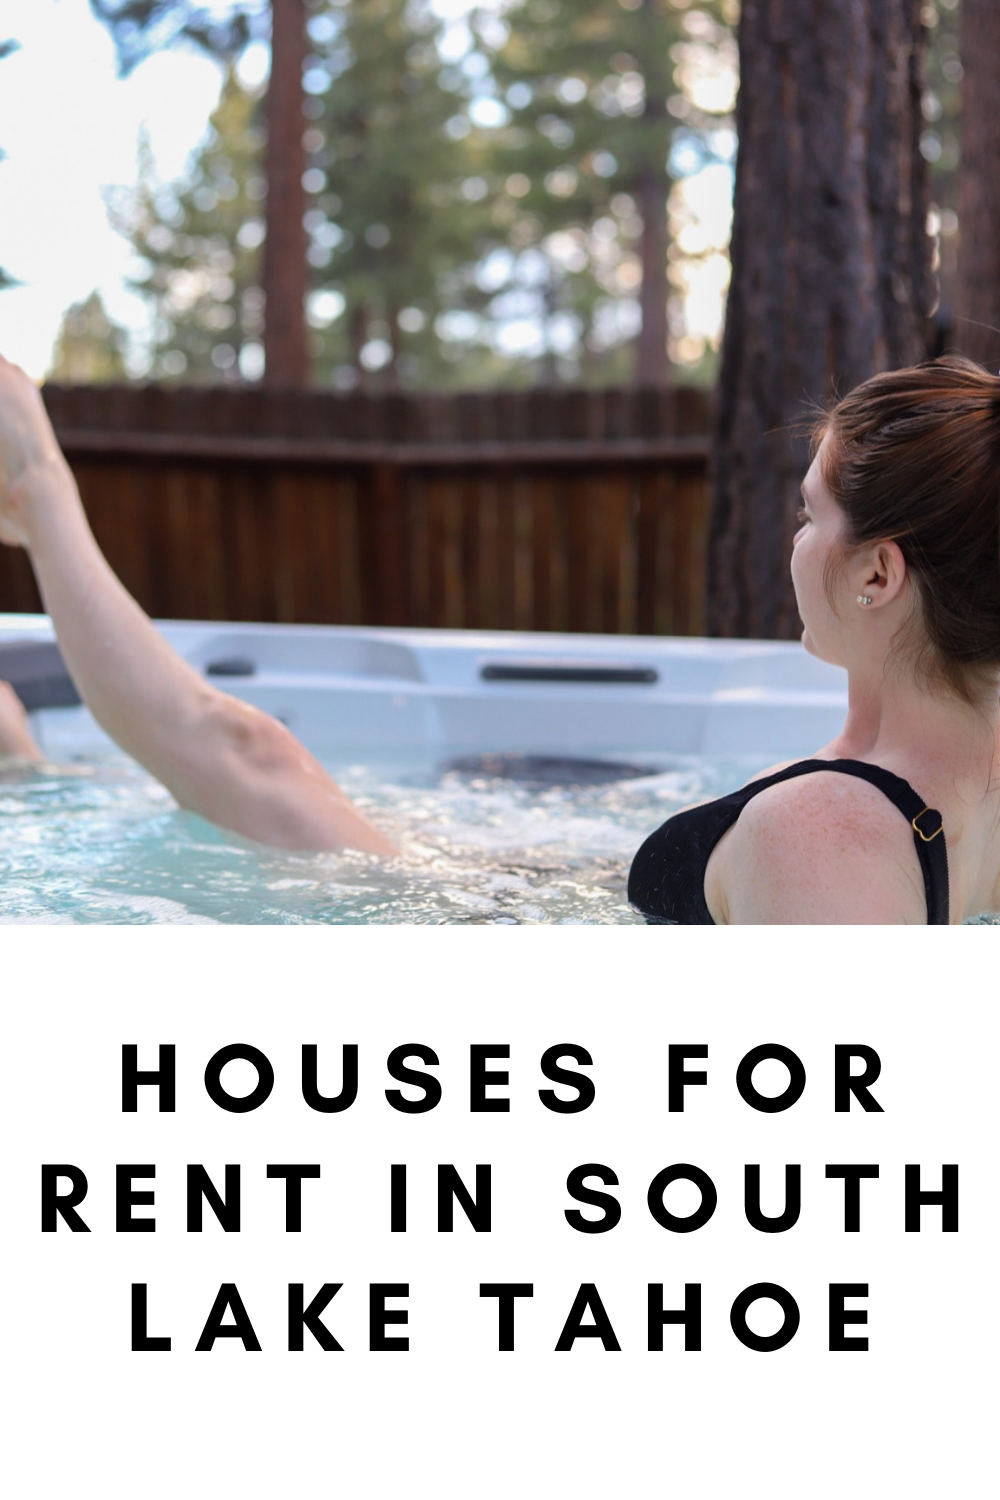 where to stay in south lake tahoe ft. RnR Vacation Rentals, short term rentals, long term rentals, 30 days, 90 days, hot tub, walk to ski lift, lakefront property, lments of style, la blogger, la roadtrip, family vacation